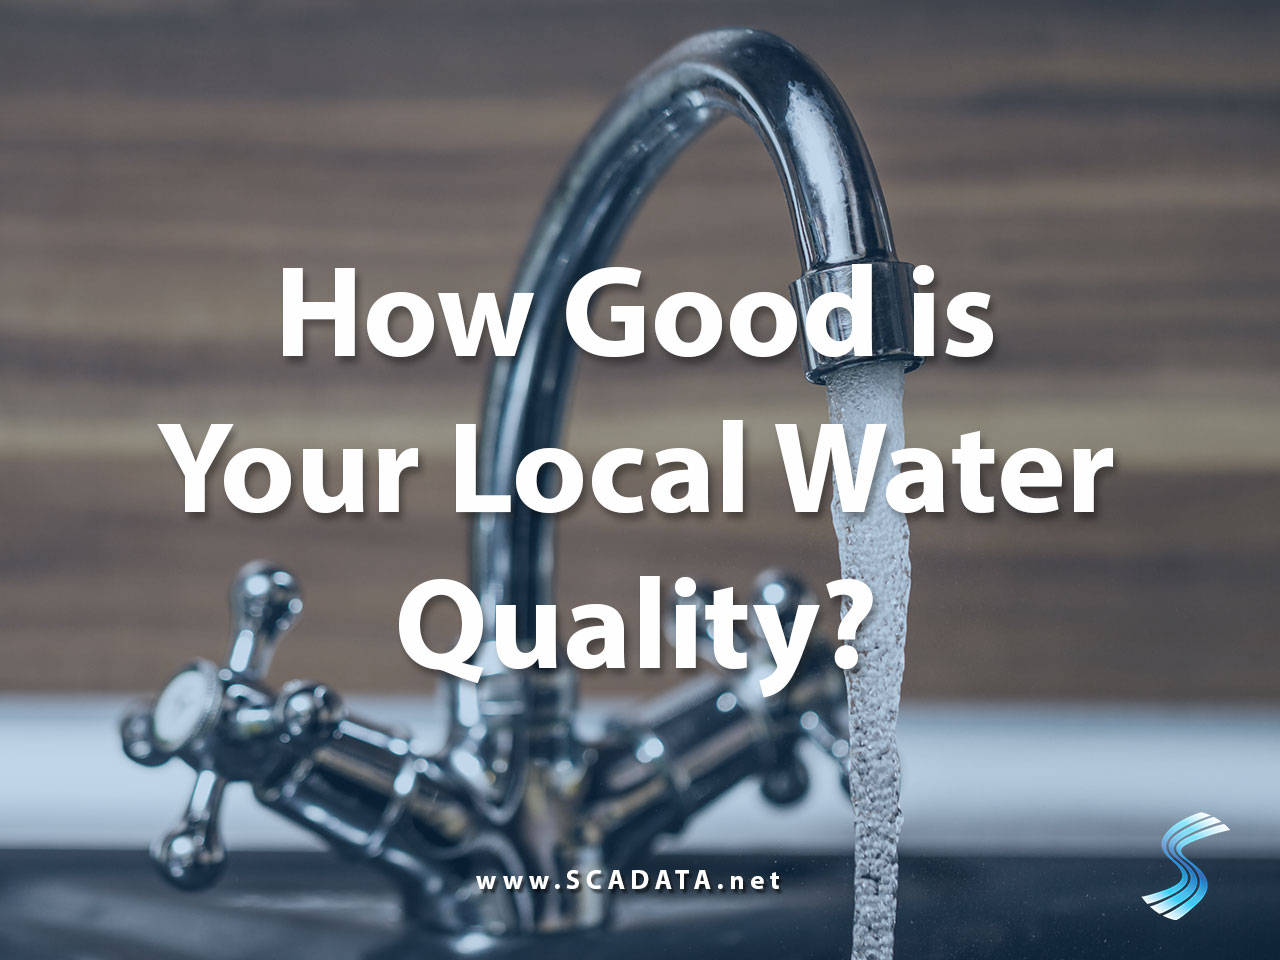 How Good is Your Local Water Quality? - Scadata.net